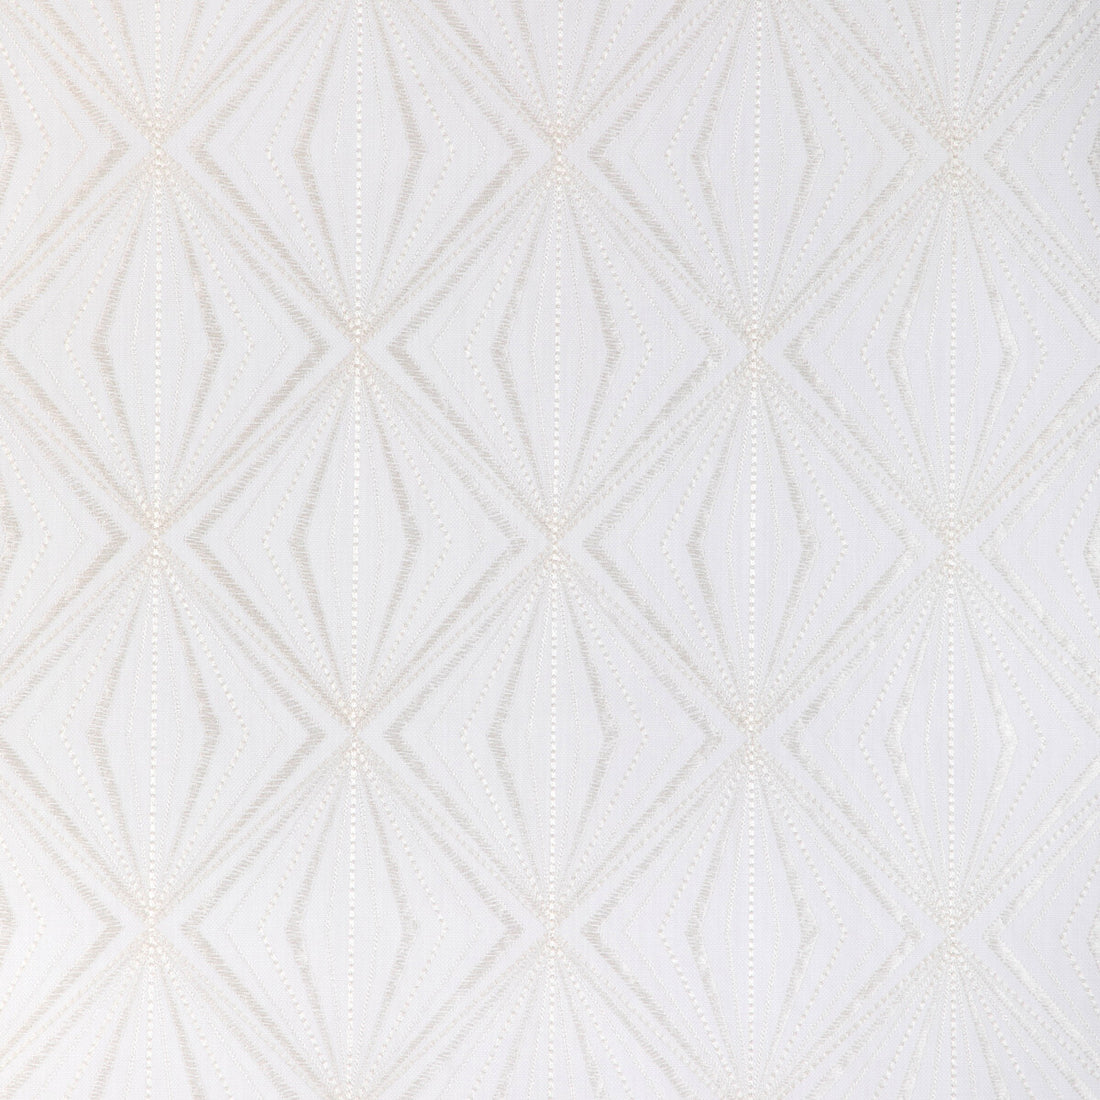 Rare Diamond fabric in ivory color - pattern 36873.1.0 - by Kravet Design in the Candice Olson collection